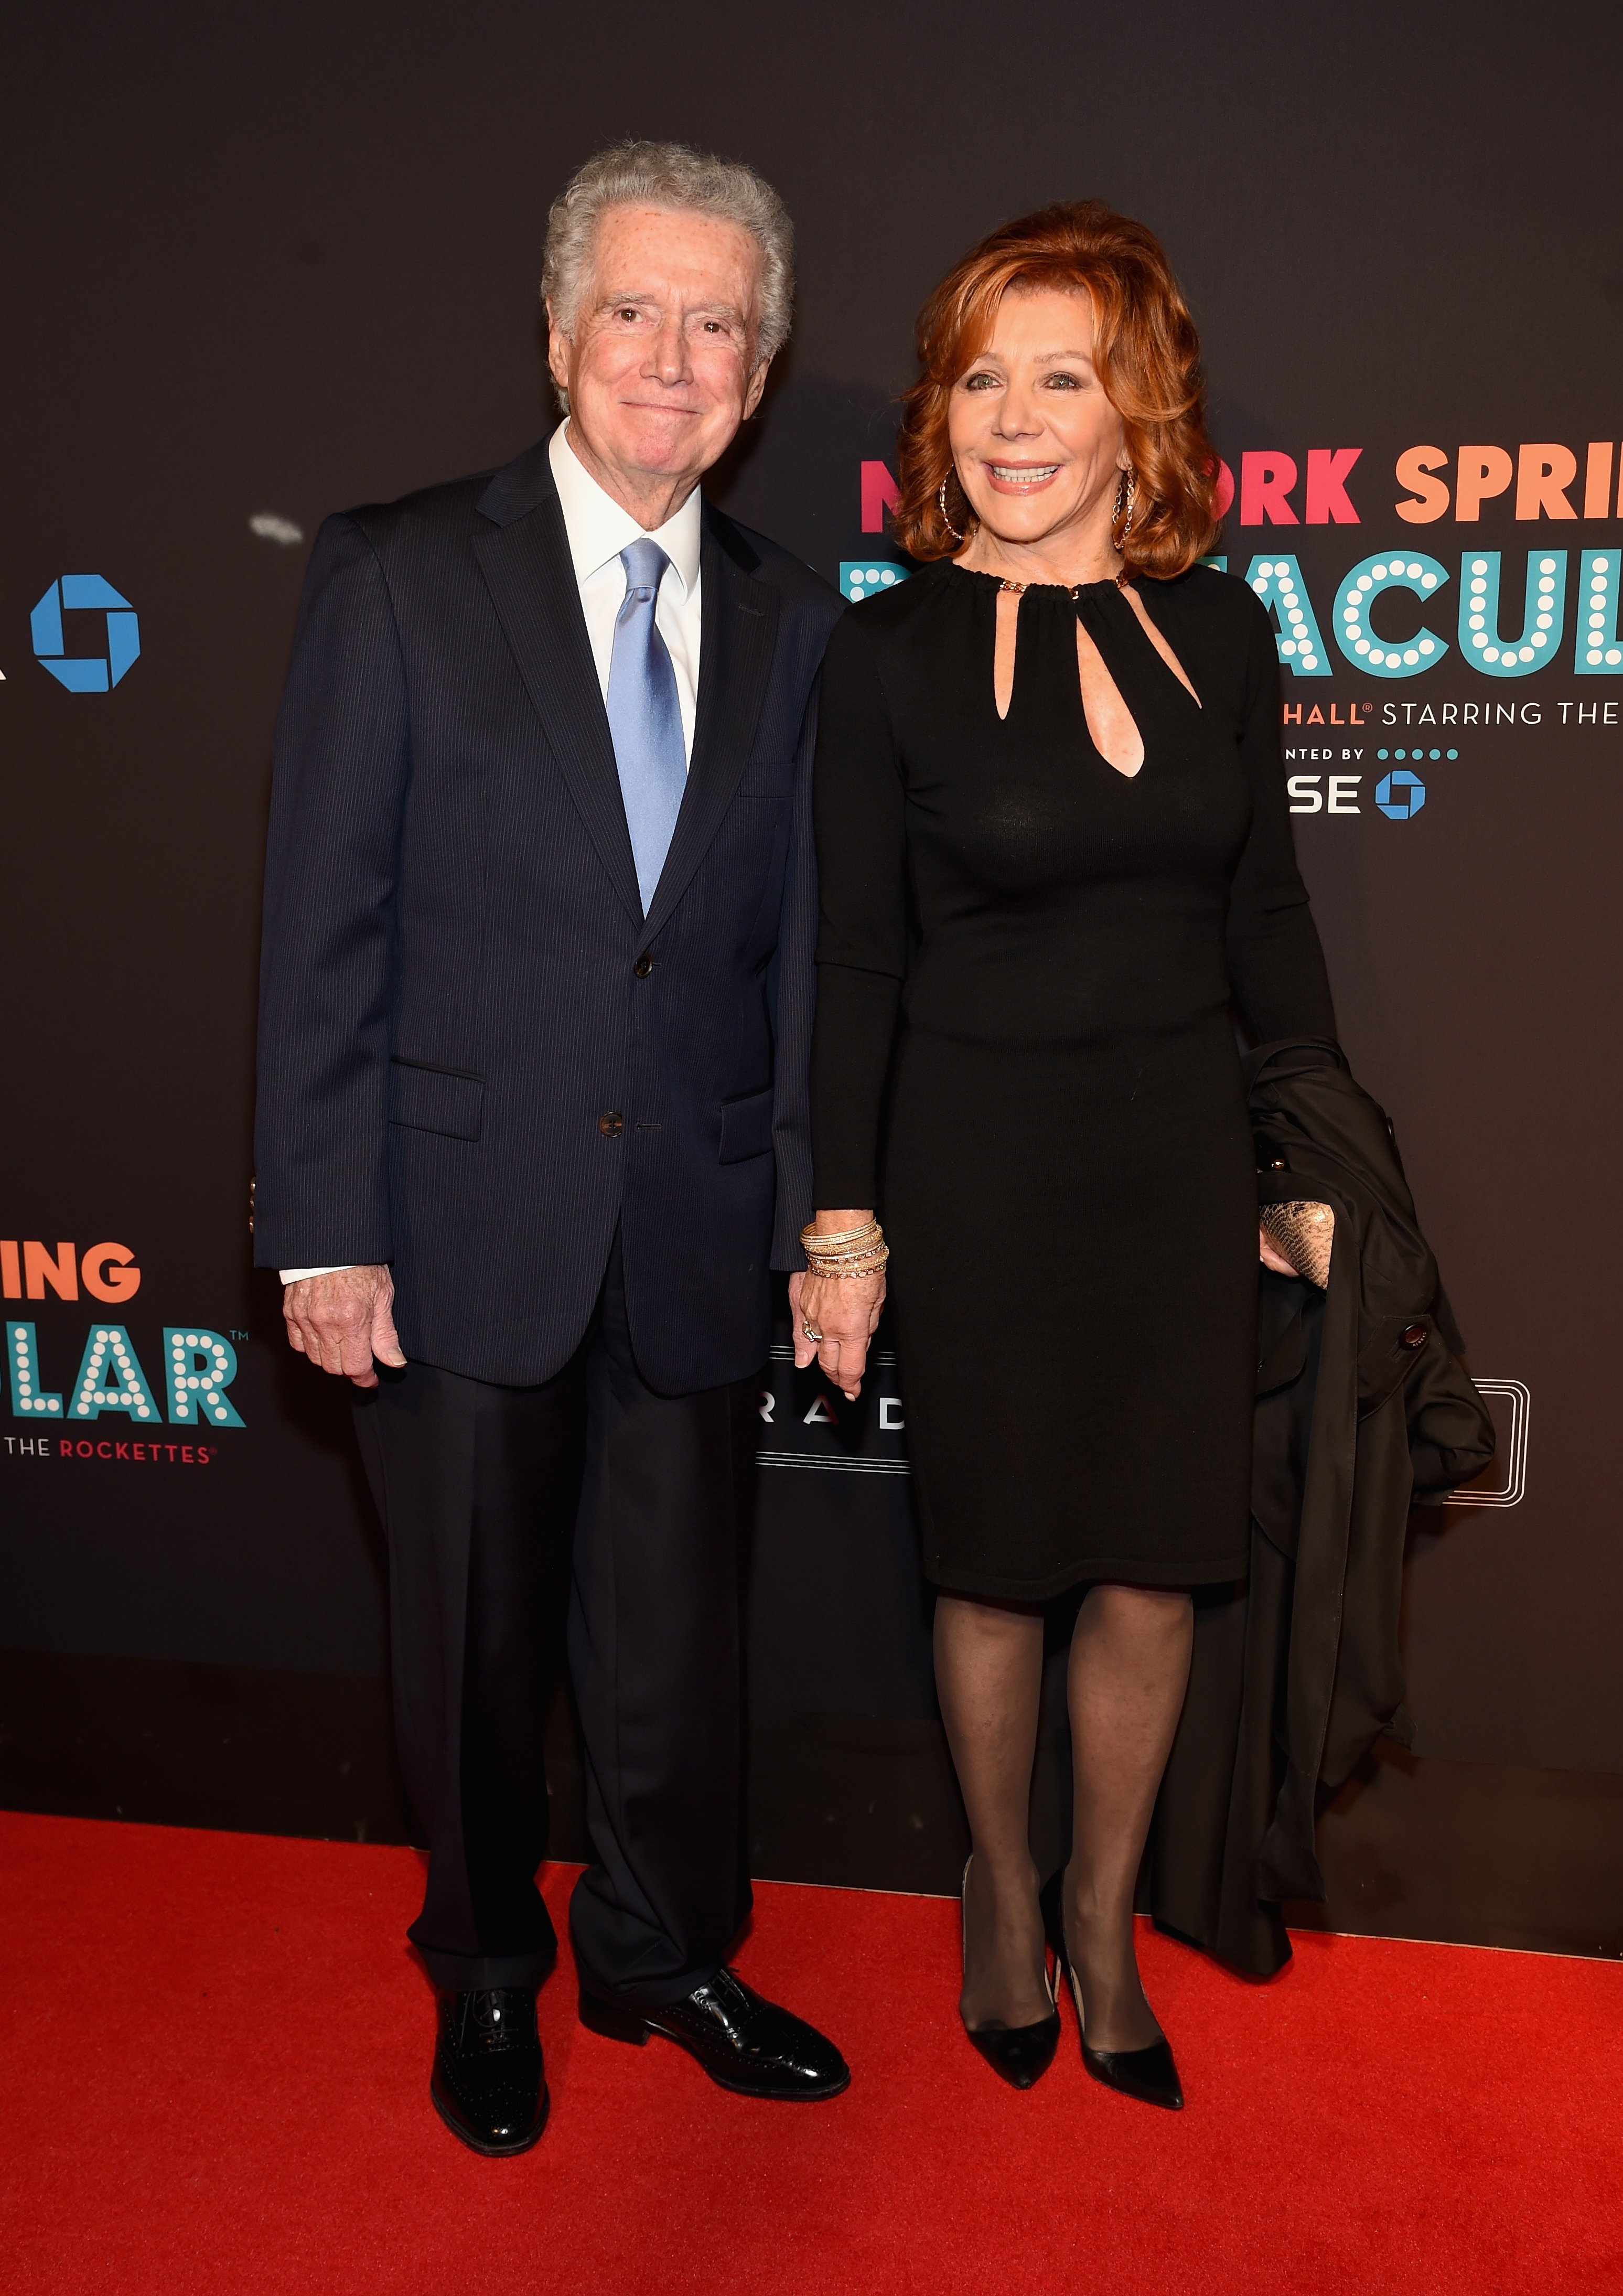 Regis and Joy Philbin attend the New York Spring Spectacular on March 26, 2015 | Photo: Getty Images